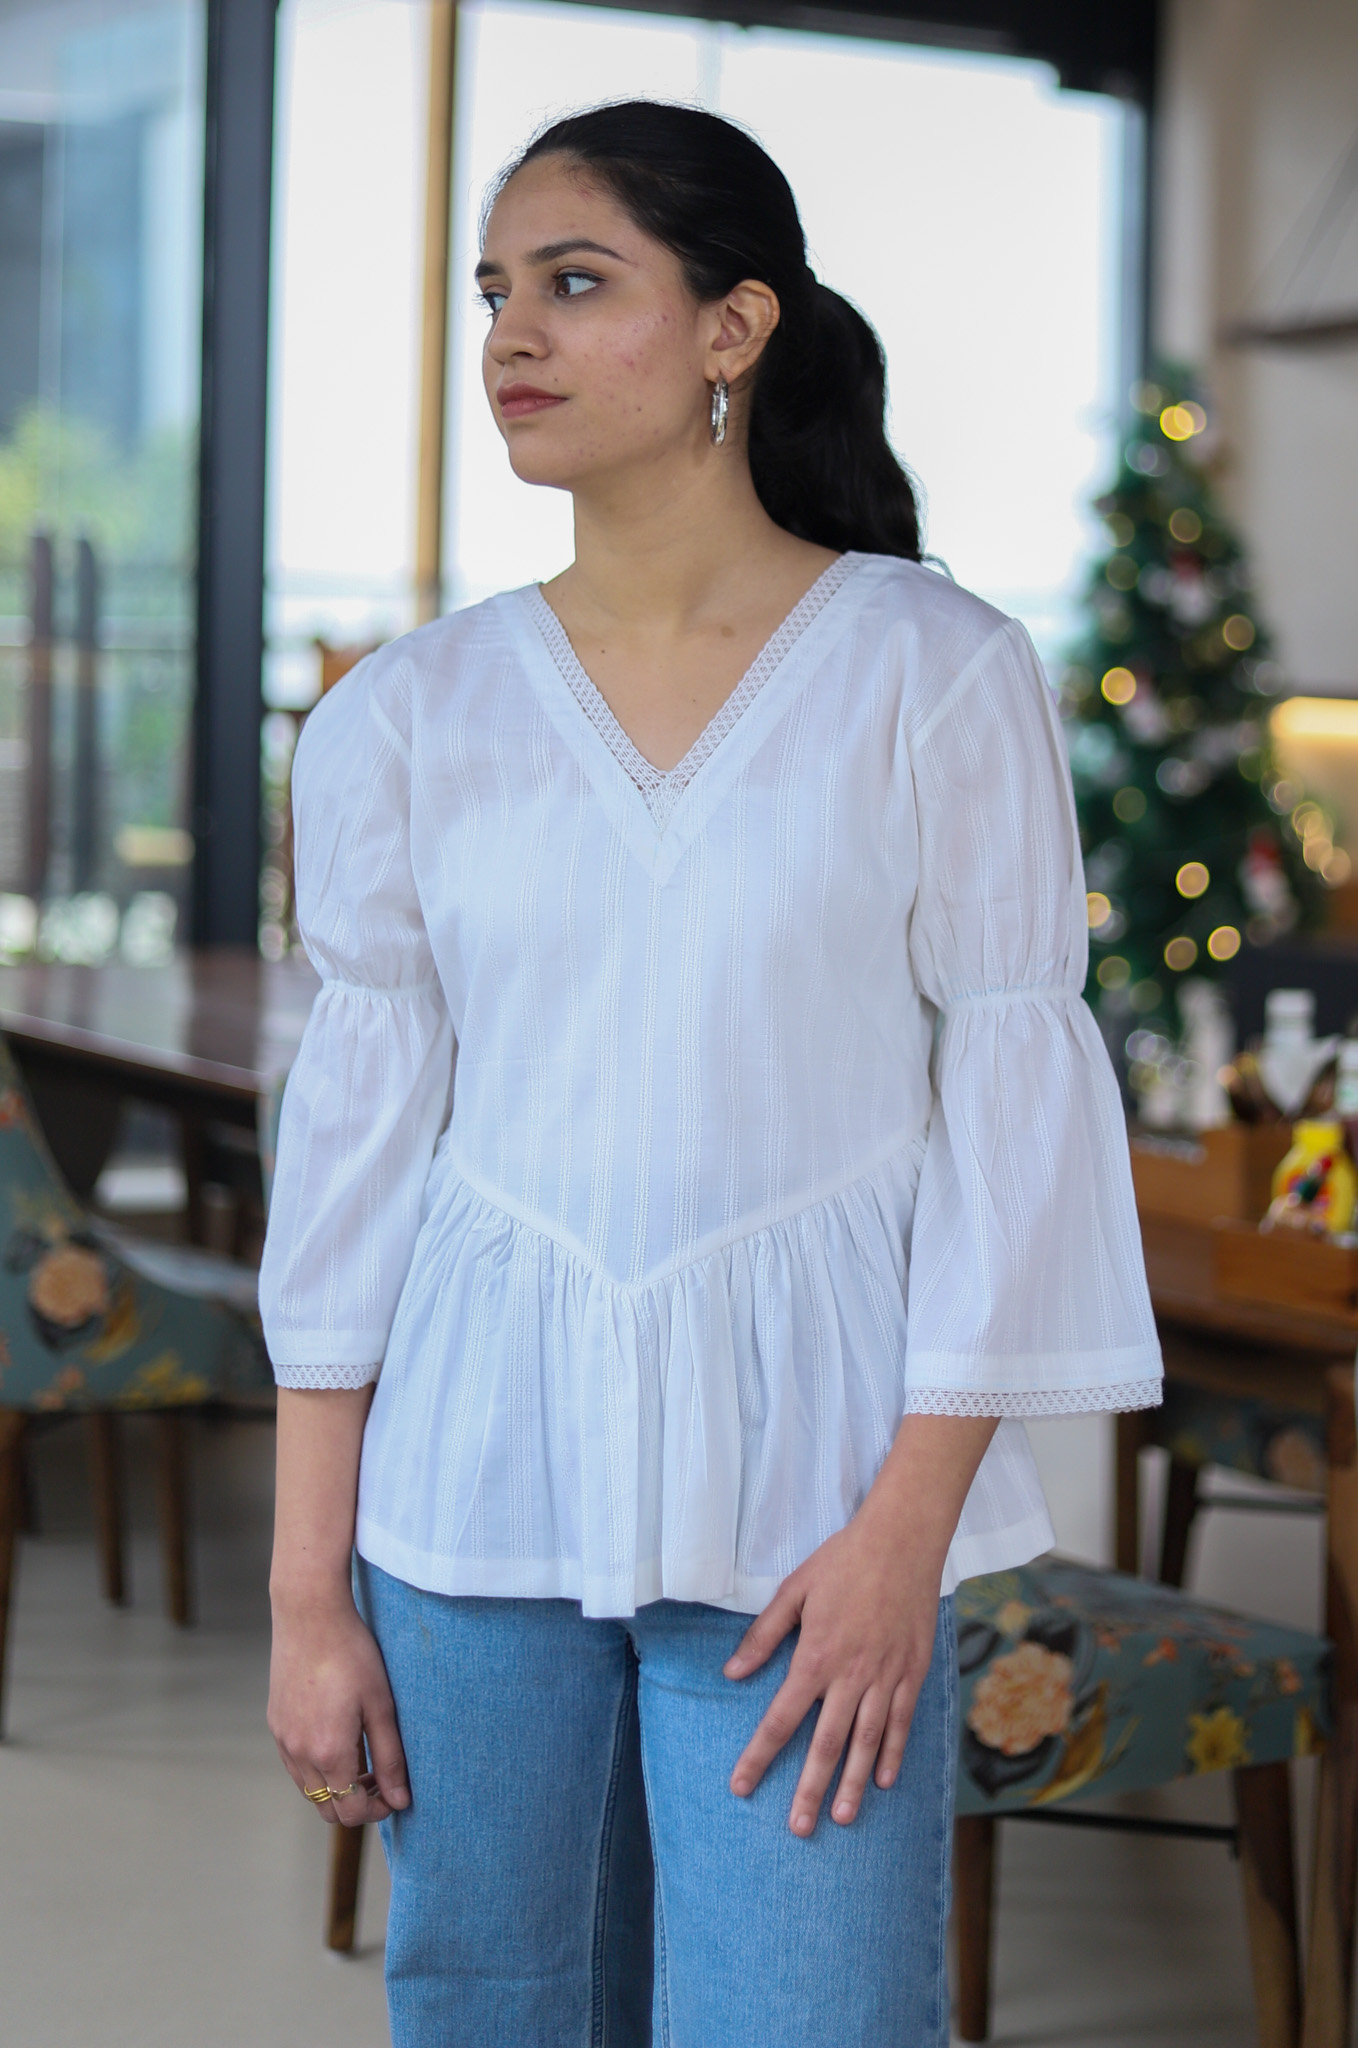 White V-Neck Peplum Top - Contemporay Wear- That's Indian